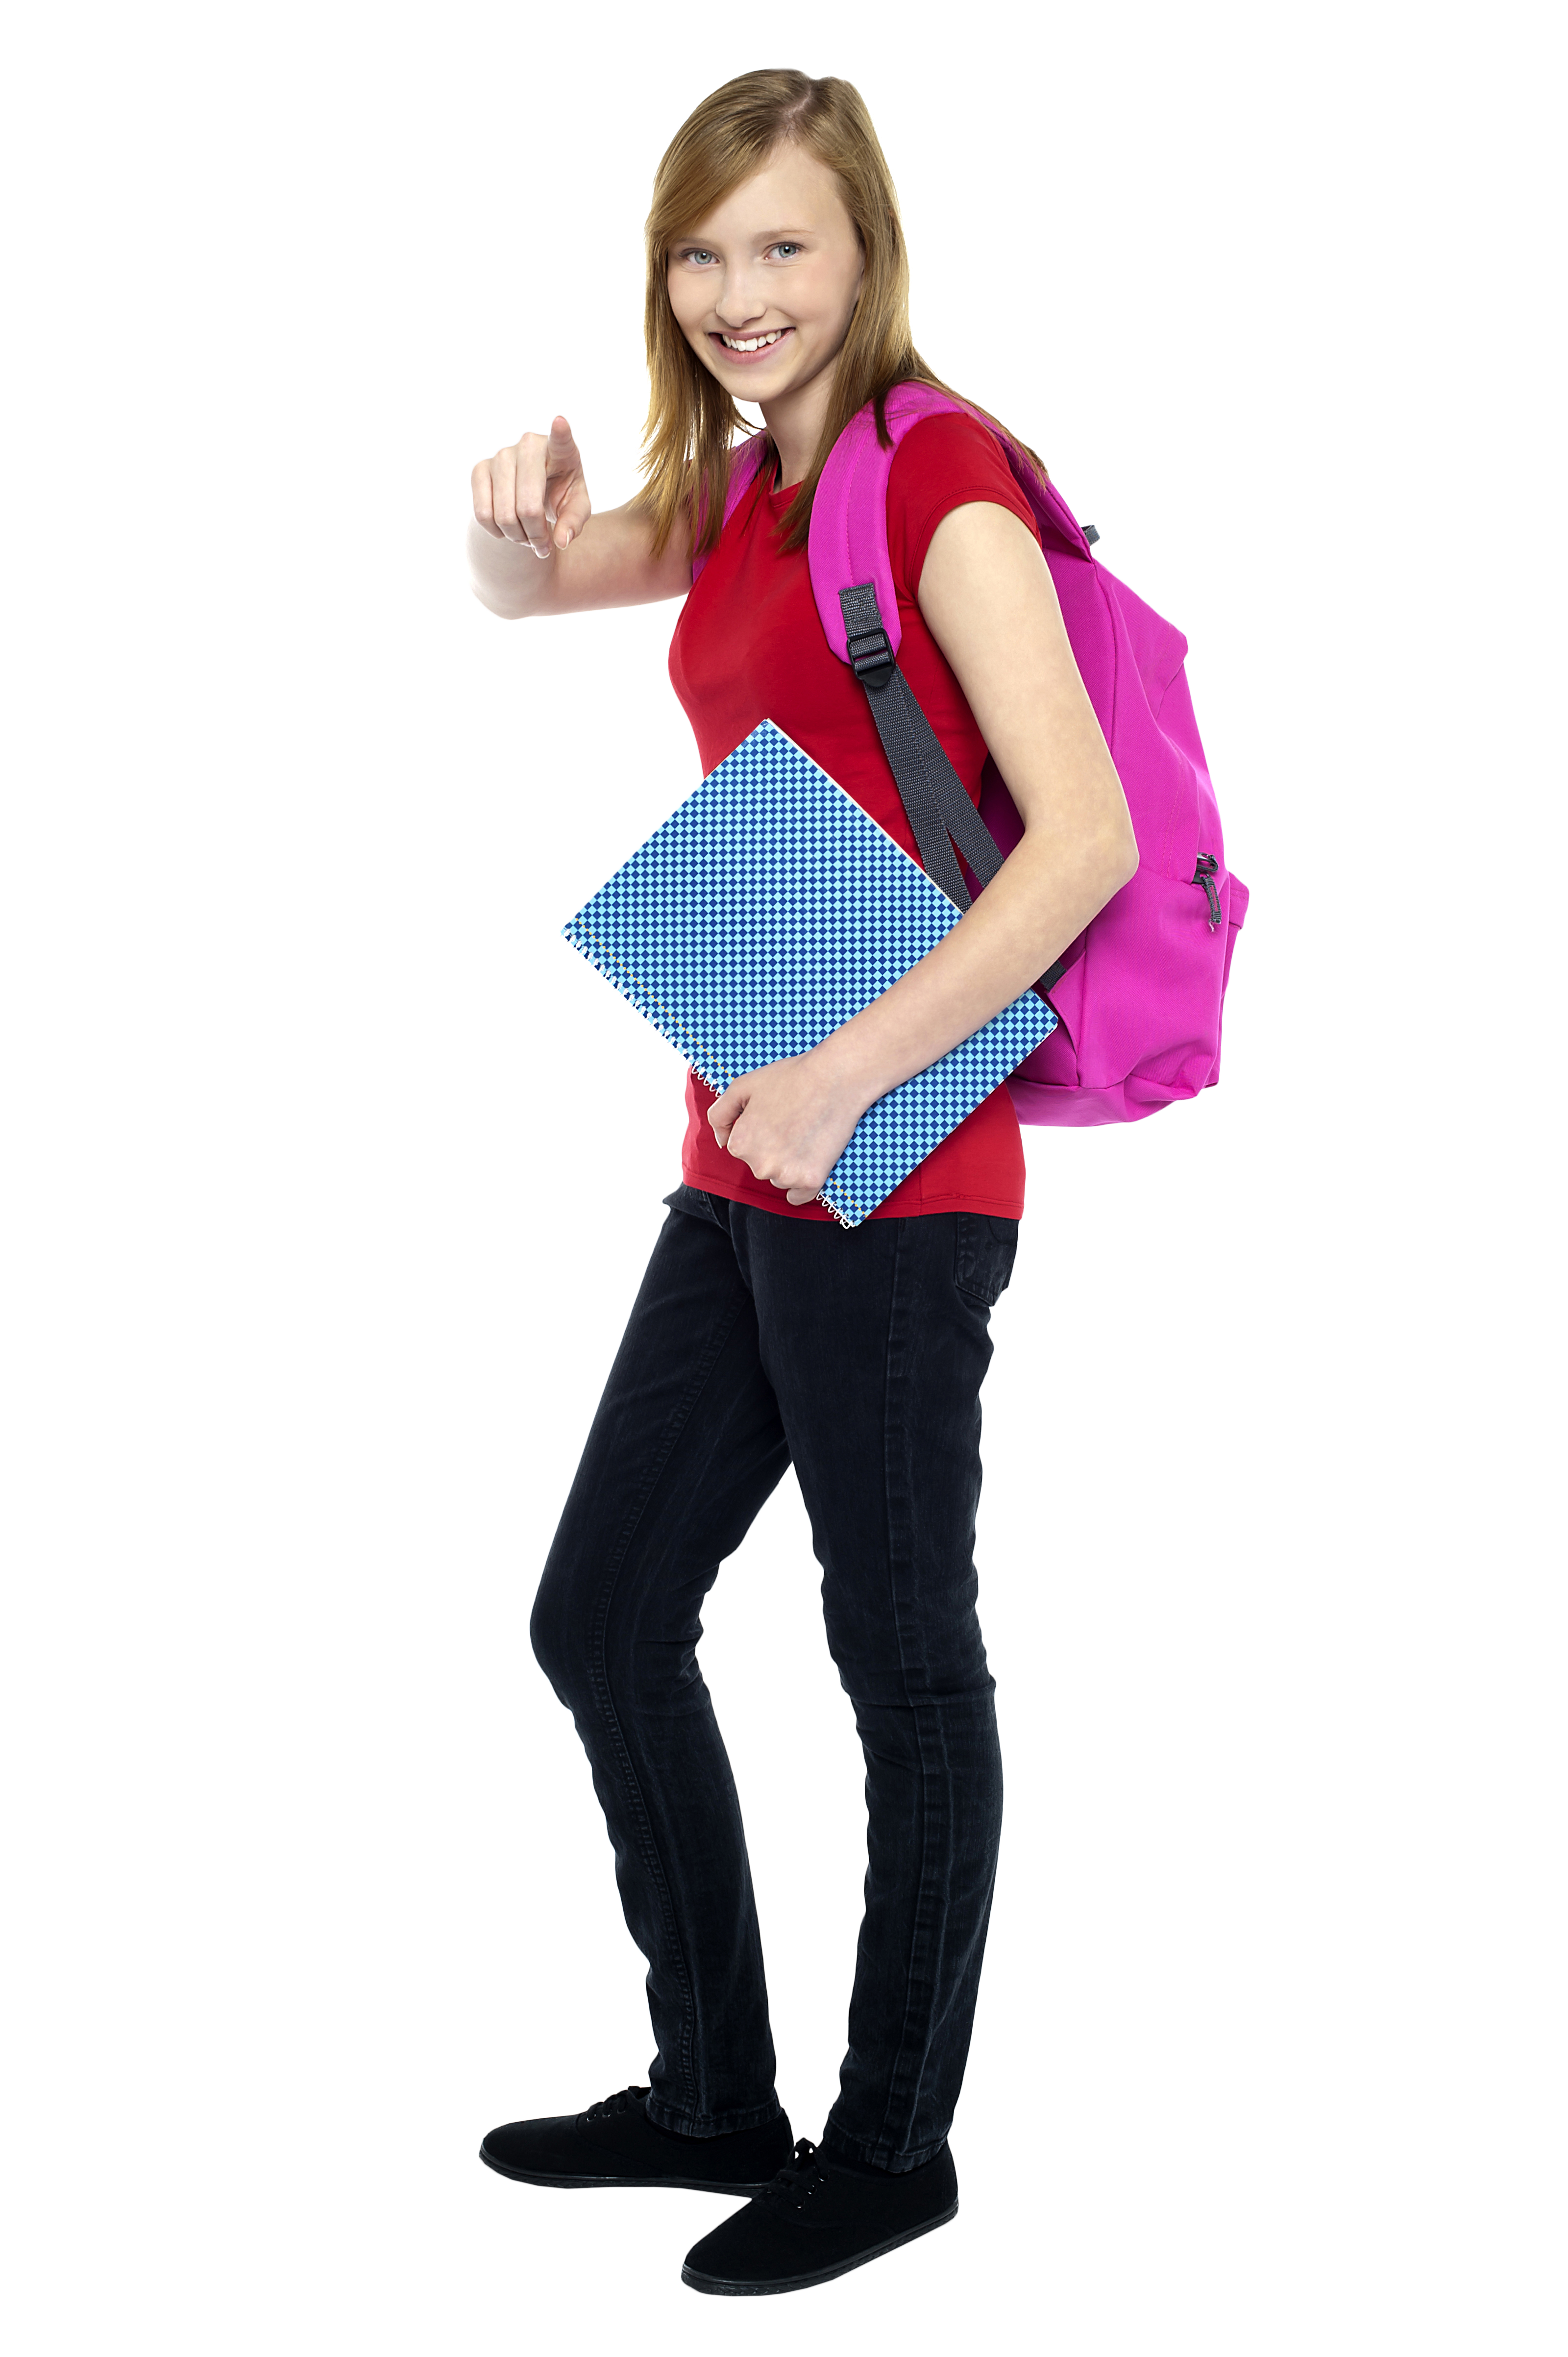 Young Girl Student